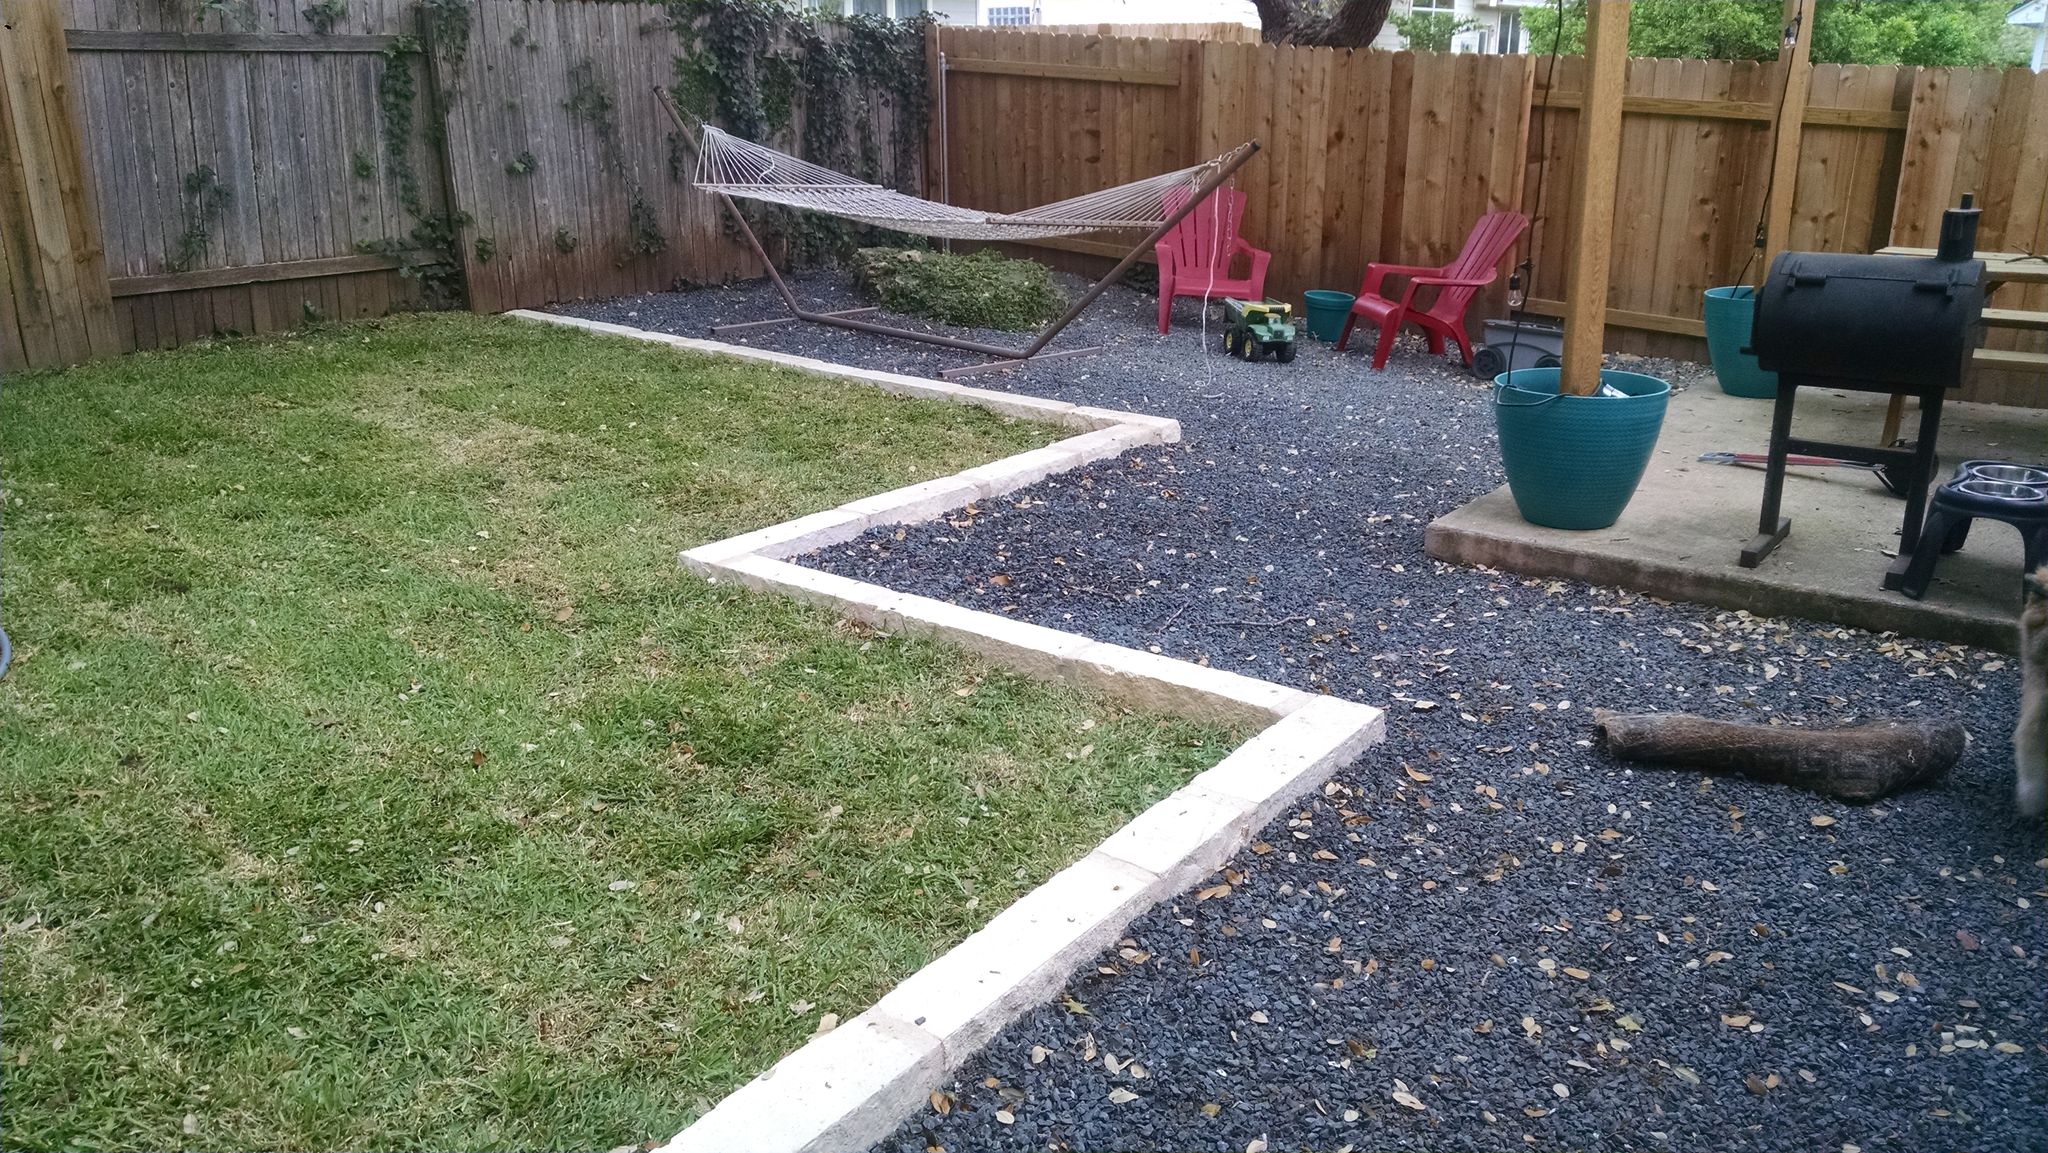 An ABC customer's lawn and landscaping area